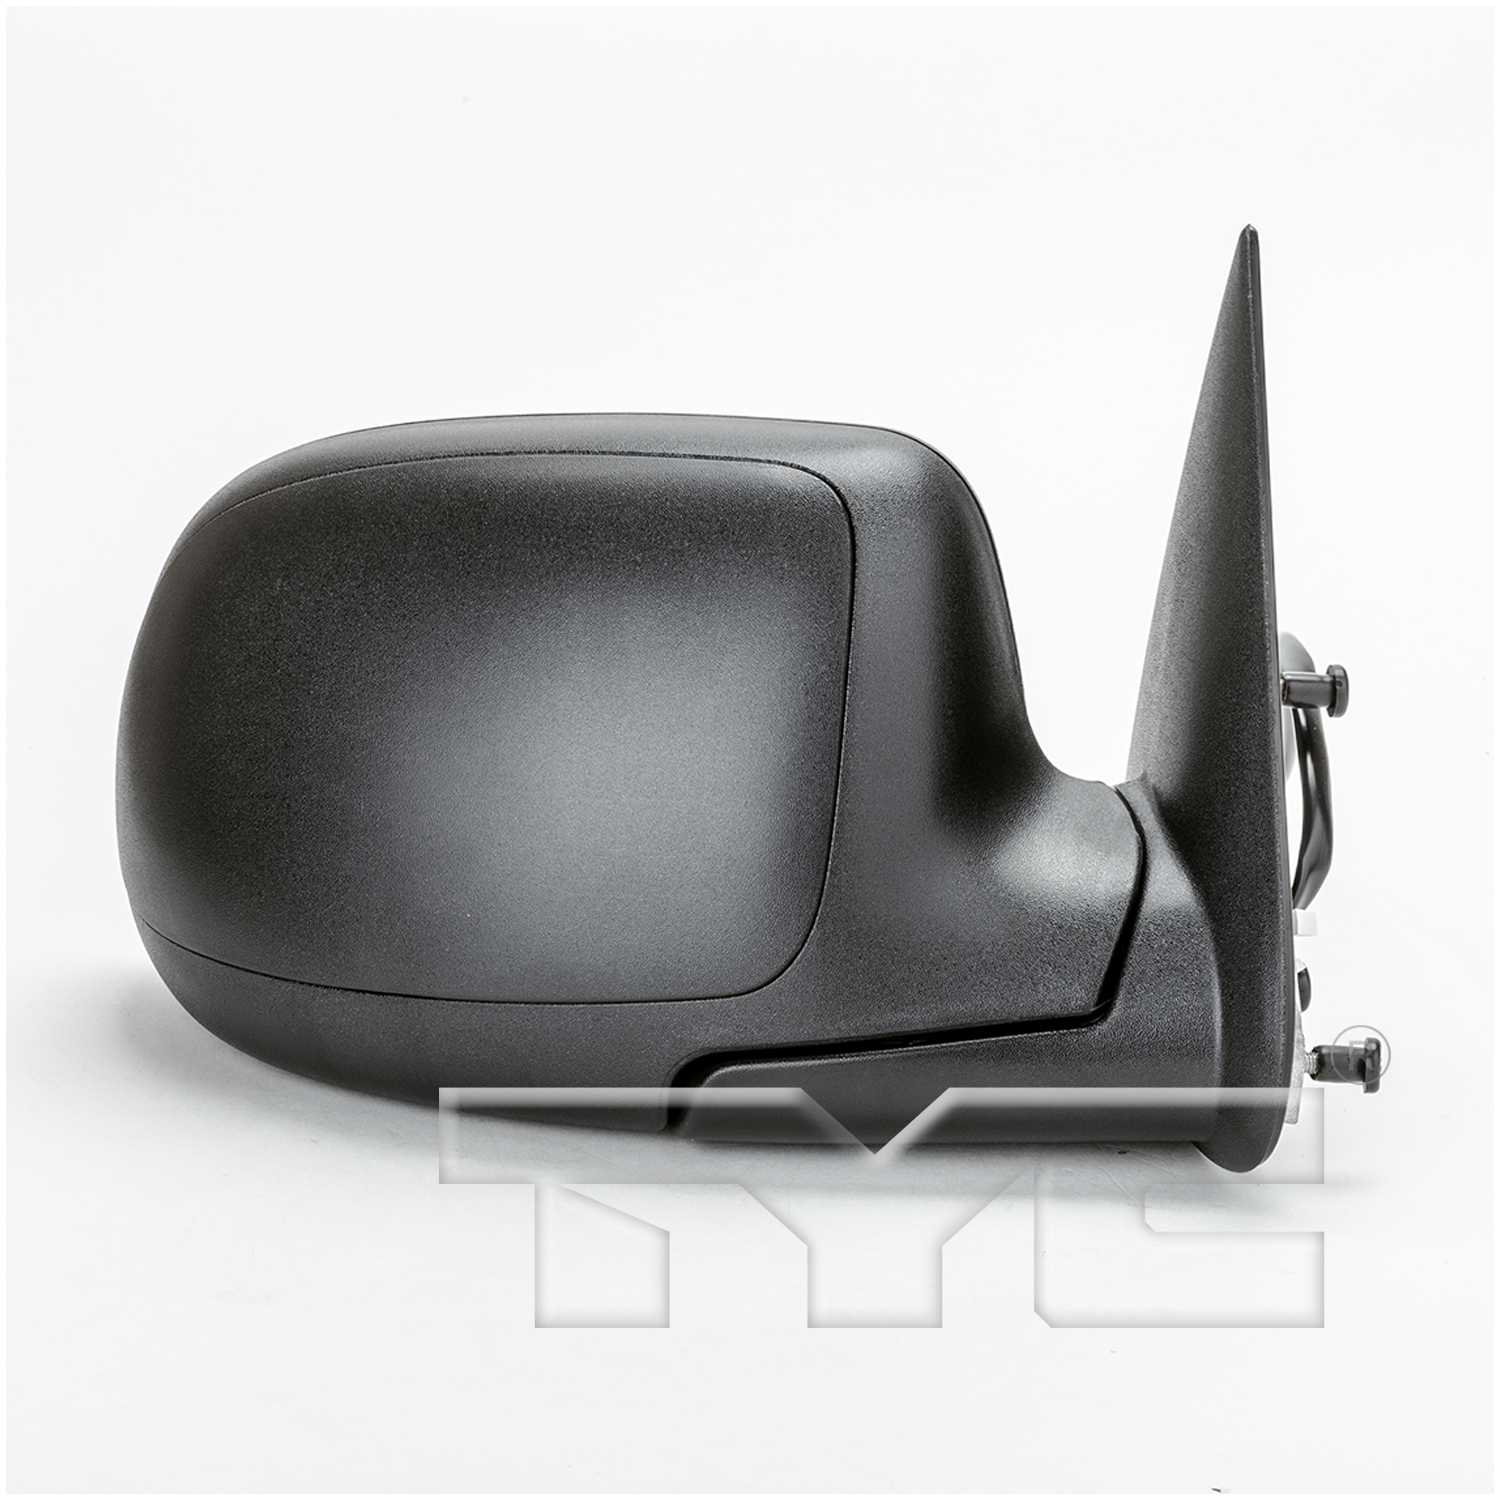 Aftermarket MIRRORS for GMC - SIERRA 2500 HD CLASSIC, SIERRA 2500 HD CLASSIC,07-07,RT Mirror outside rear view